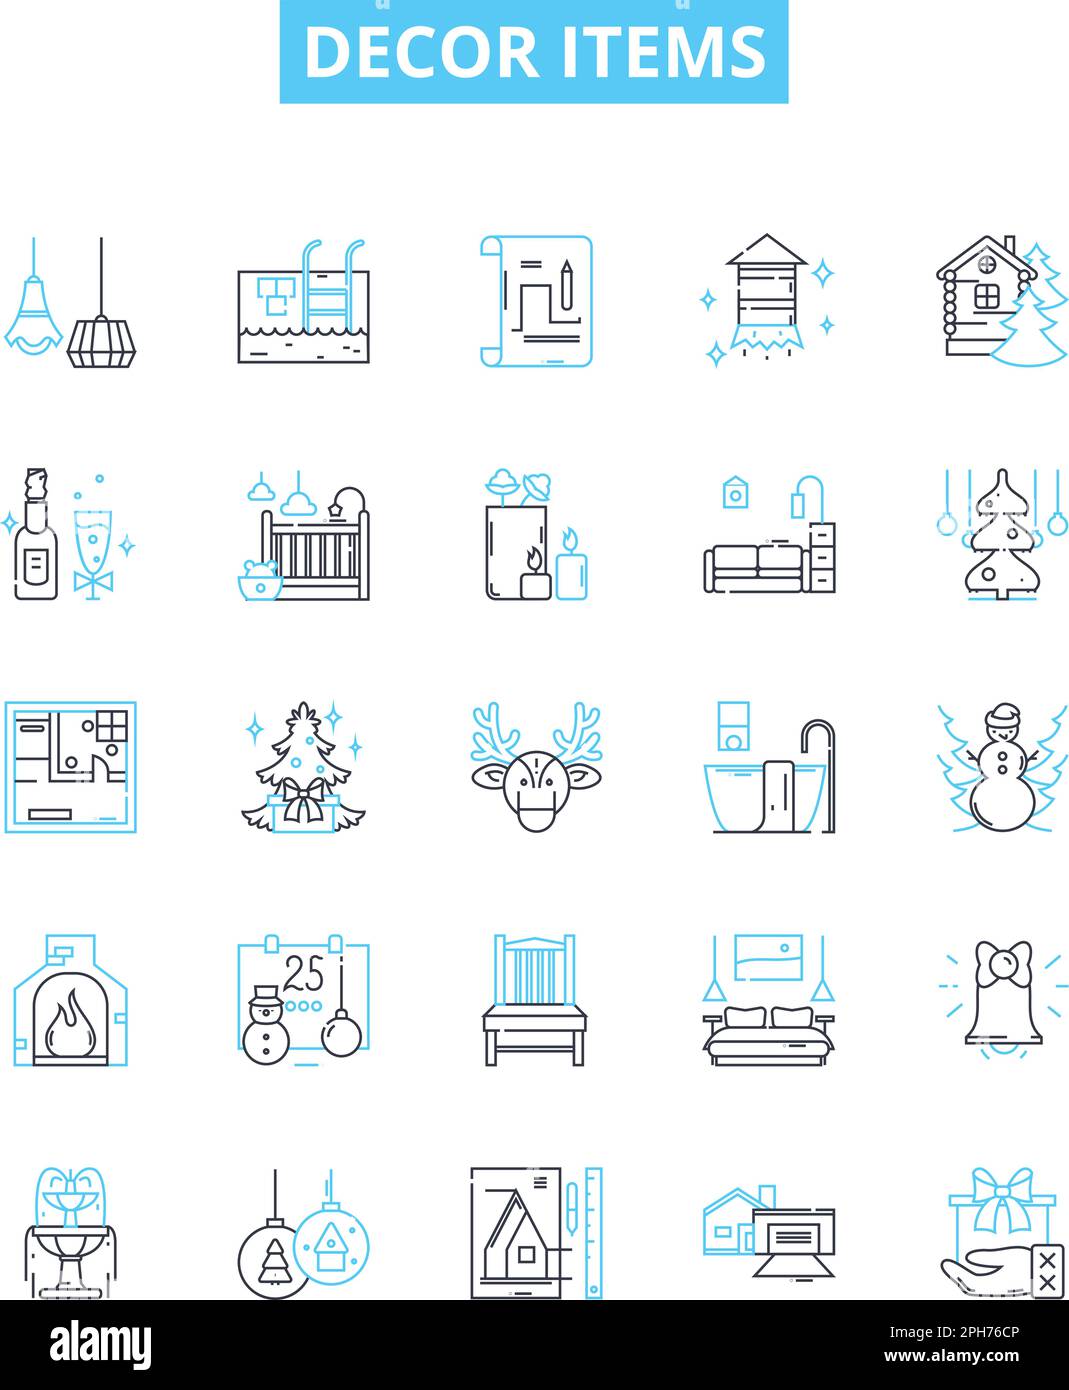 Decor items vector line icons set. Furnishings, Rugs, Lighting, Wallpaper, Mirrors, Curtains, Vases illustration outline concept symbols and signs Stock Vector